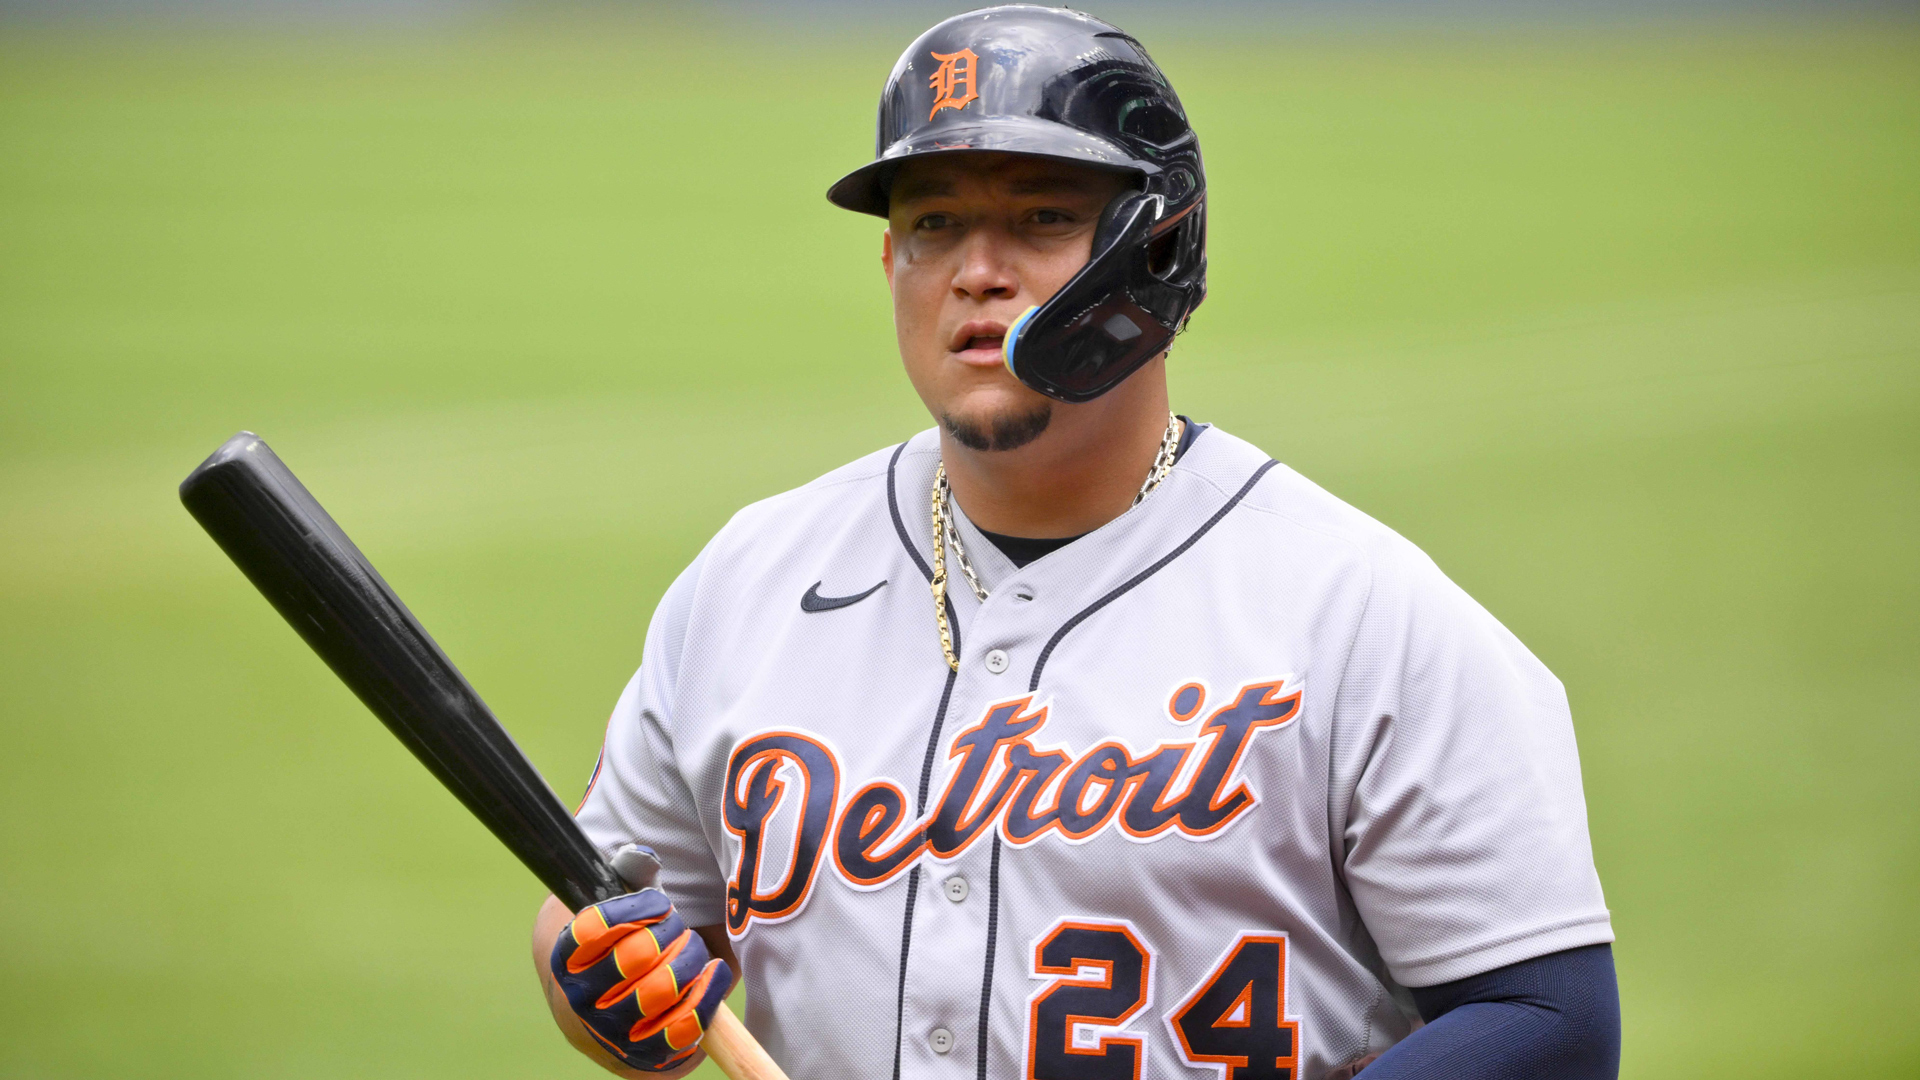 MLB Network - Miguel Cabrera will become just the 3rd player ever